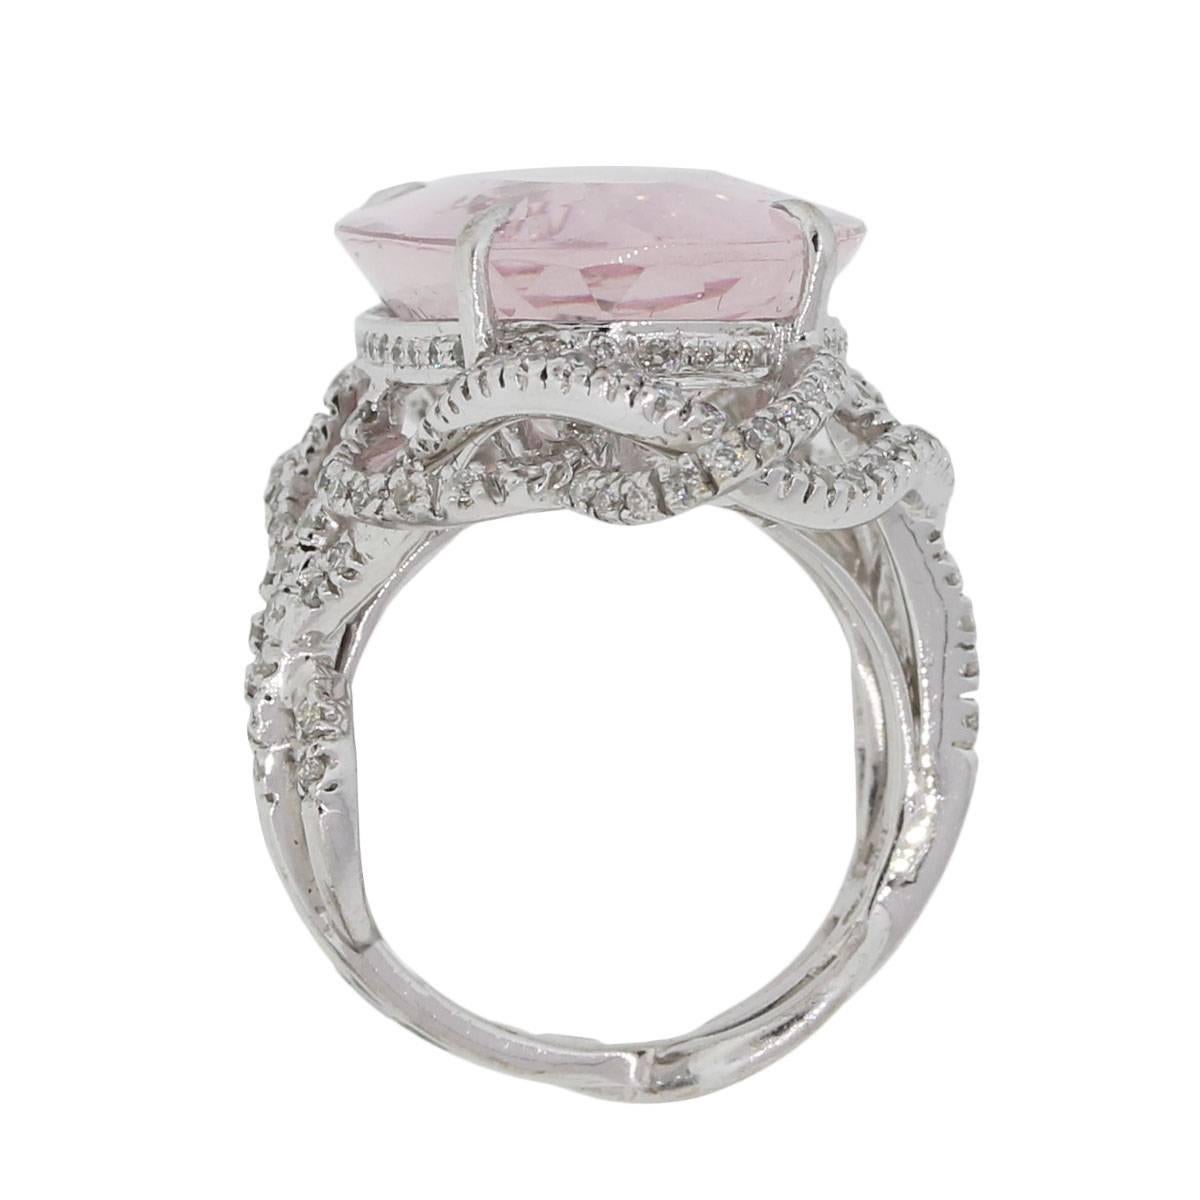 Material: 18k white gold
Diamond Details: Approximately 1.5ctw of round brilliant diamonds. Diamonds are G/H in color and SI in clarity
Gemstone Details: Oval shape Kunzite measuring approximately 22mm x 17.72mm
Ring Size: 6.75 (can be sized)
Ring